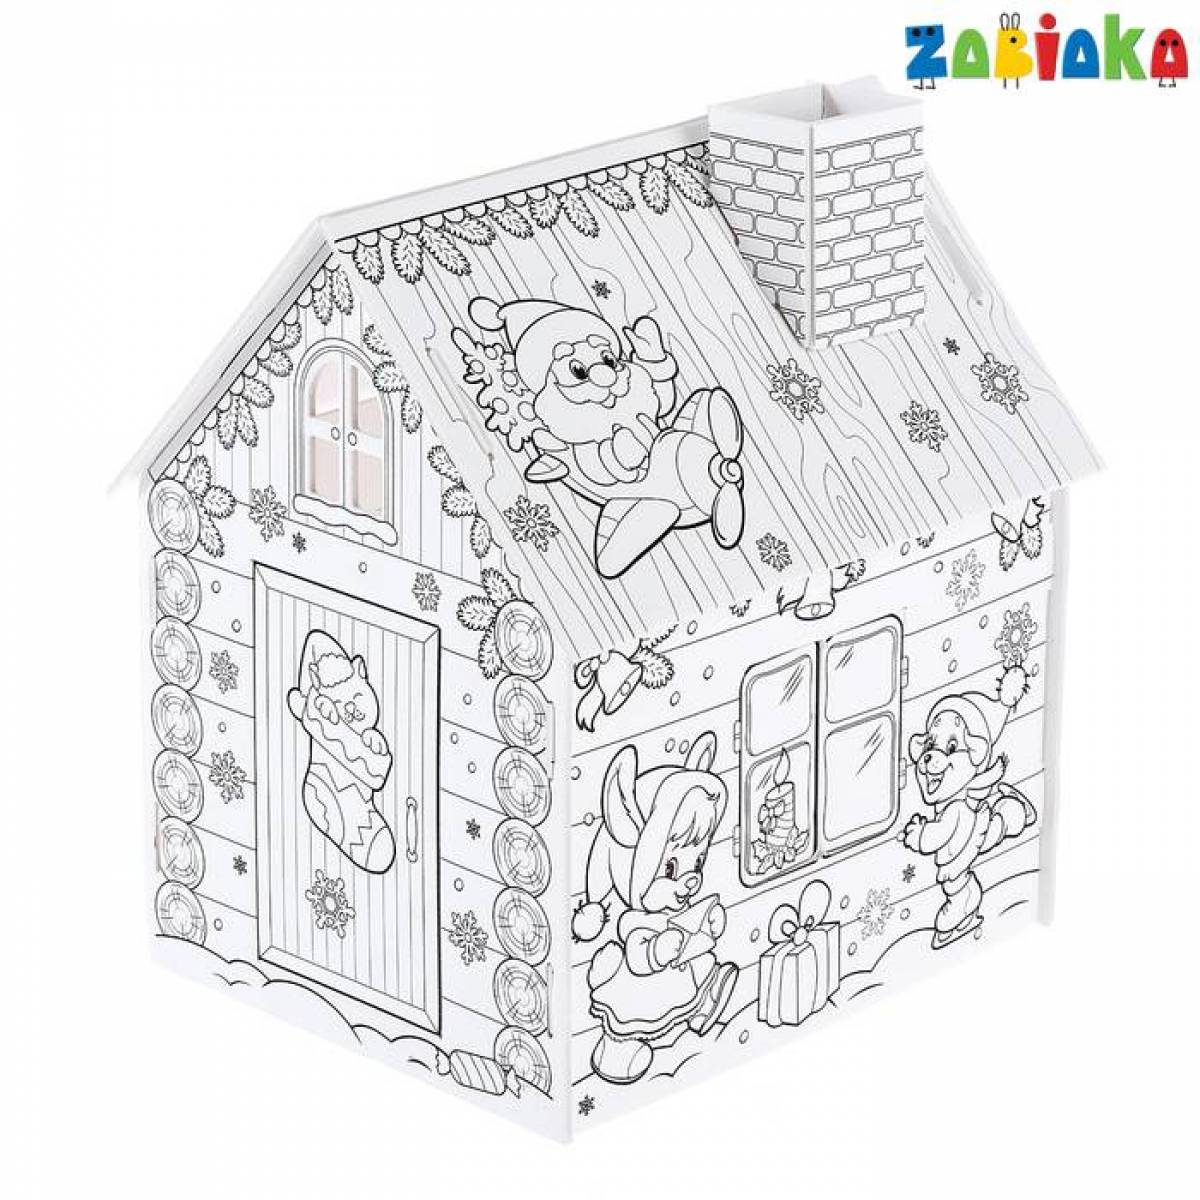 Exquisite cardboard house coloring page